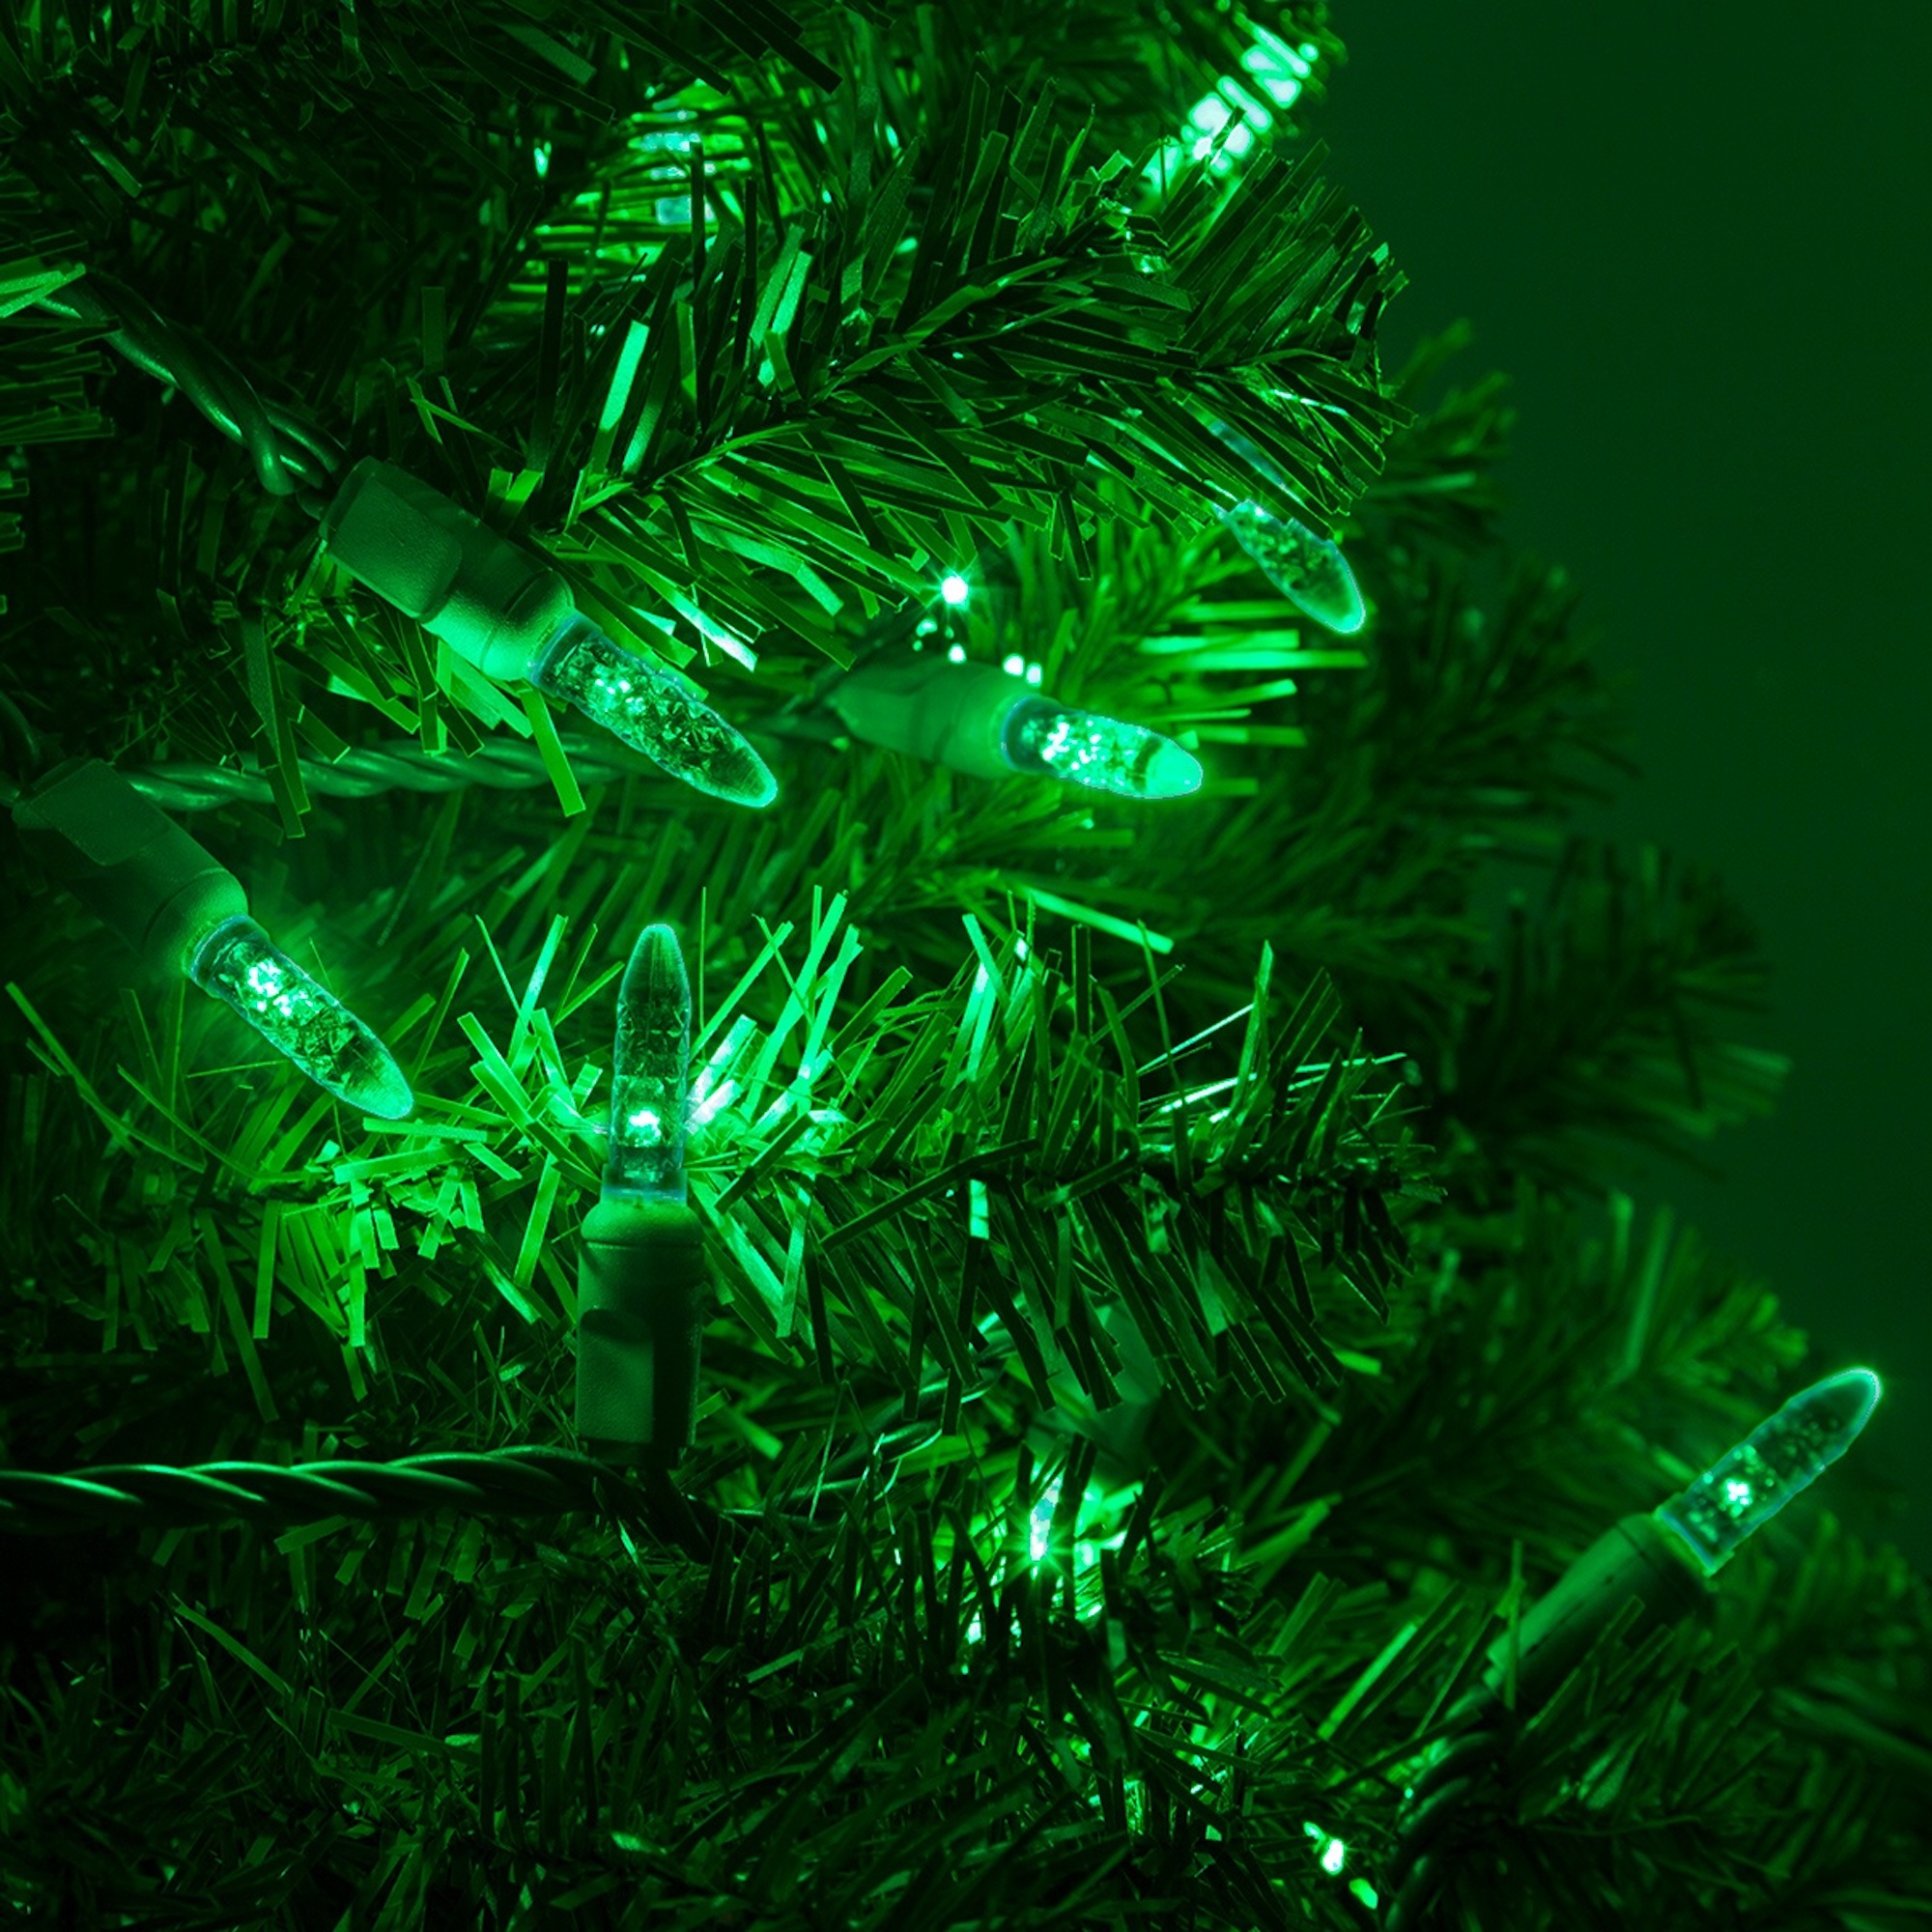 Wintergreen Lighting 70 Green LED Christmas Tree Lights, 4" Spacing, 24', Faceted String Lights for Holiday Party St. Patrick’s Day Decoration - image 3 of 8